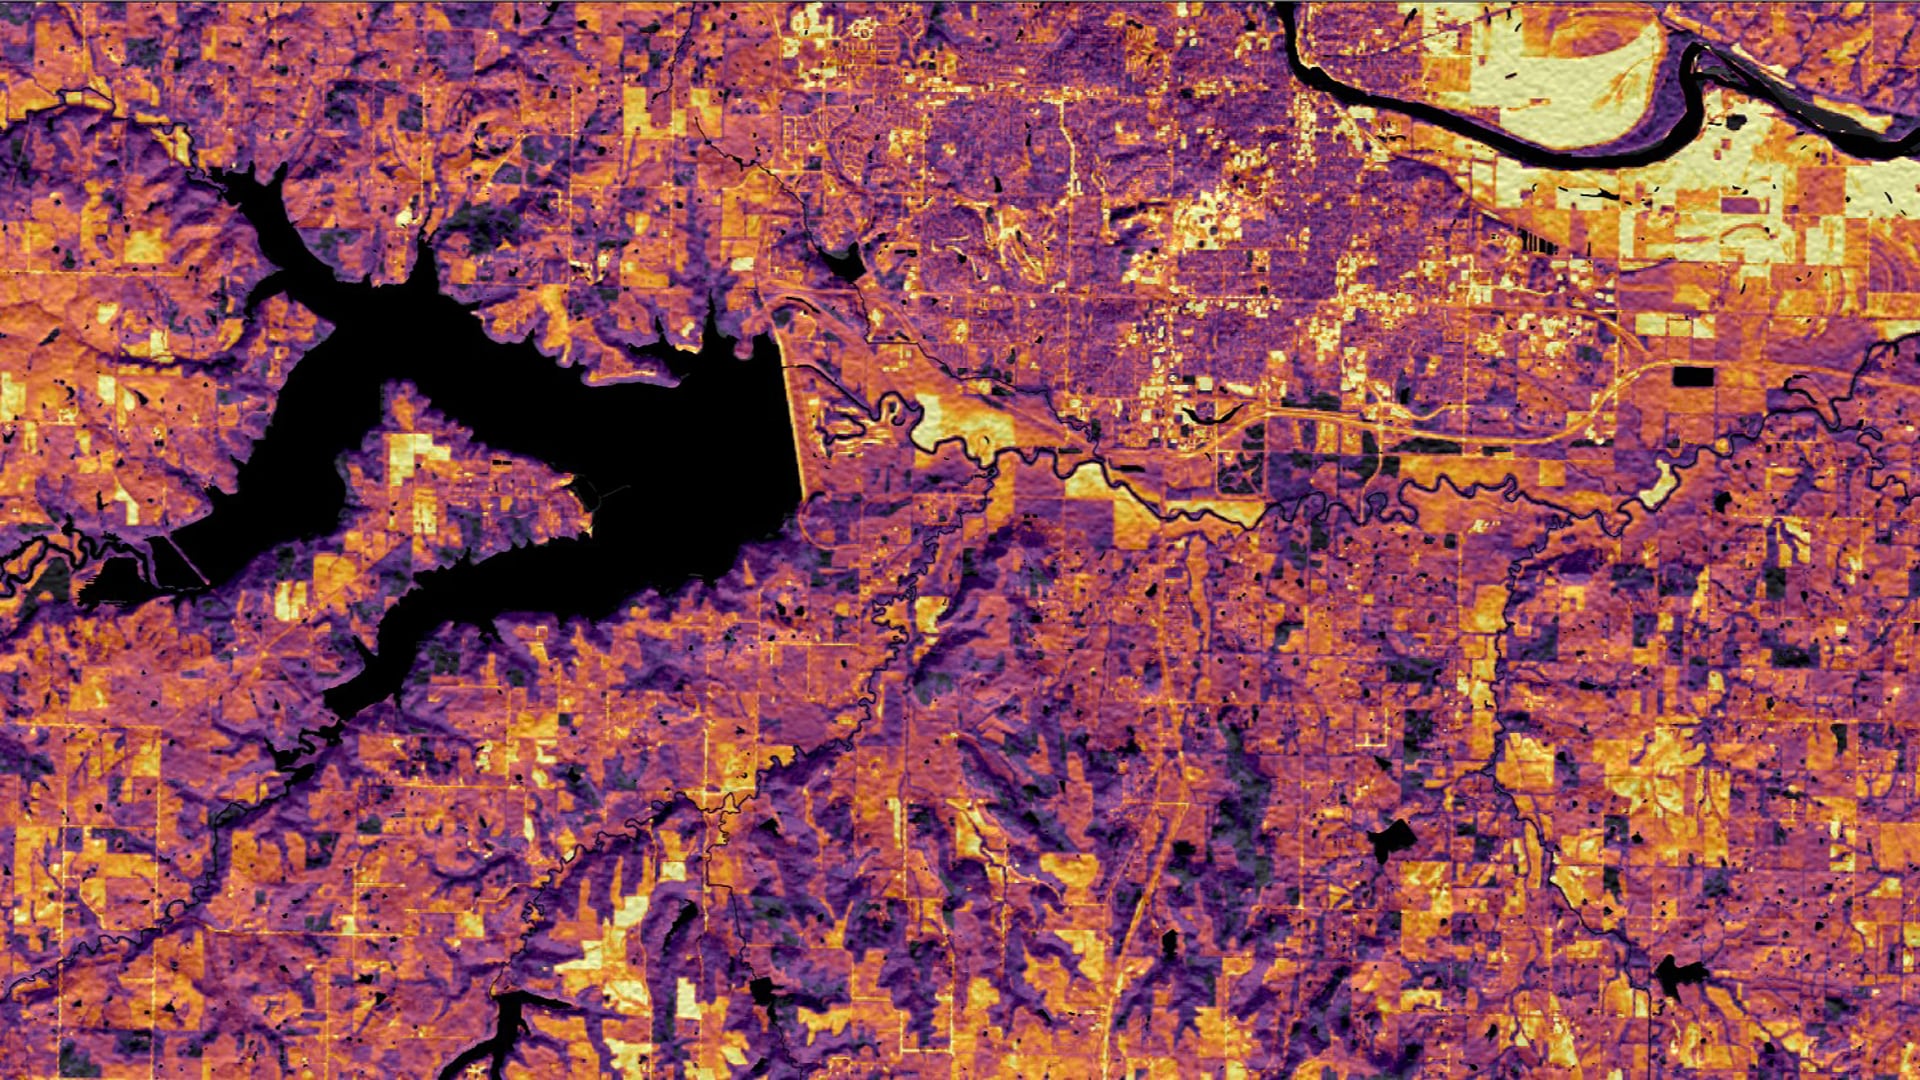 A 30-meter resolution map from a 4/26/2019 Landsat 8 OLI image with a tasseled cap brightness transformation overlaid on a solar insolation map derived from a 9/23/2014 DEM created with the SRTM C-Band. Lawrence, Kansas, is featured here. Bright yellow signifies areas with high surface reflectance, indicating bare soil and rooftop areas ideal for solar panels. Darker purple signifies areas of low surface reflectance, indicating forest and wetland locations not ideal for solar panels.